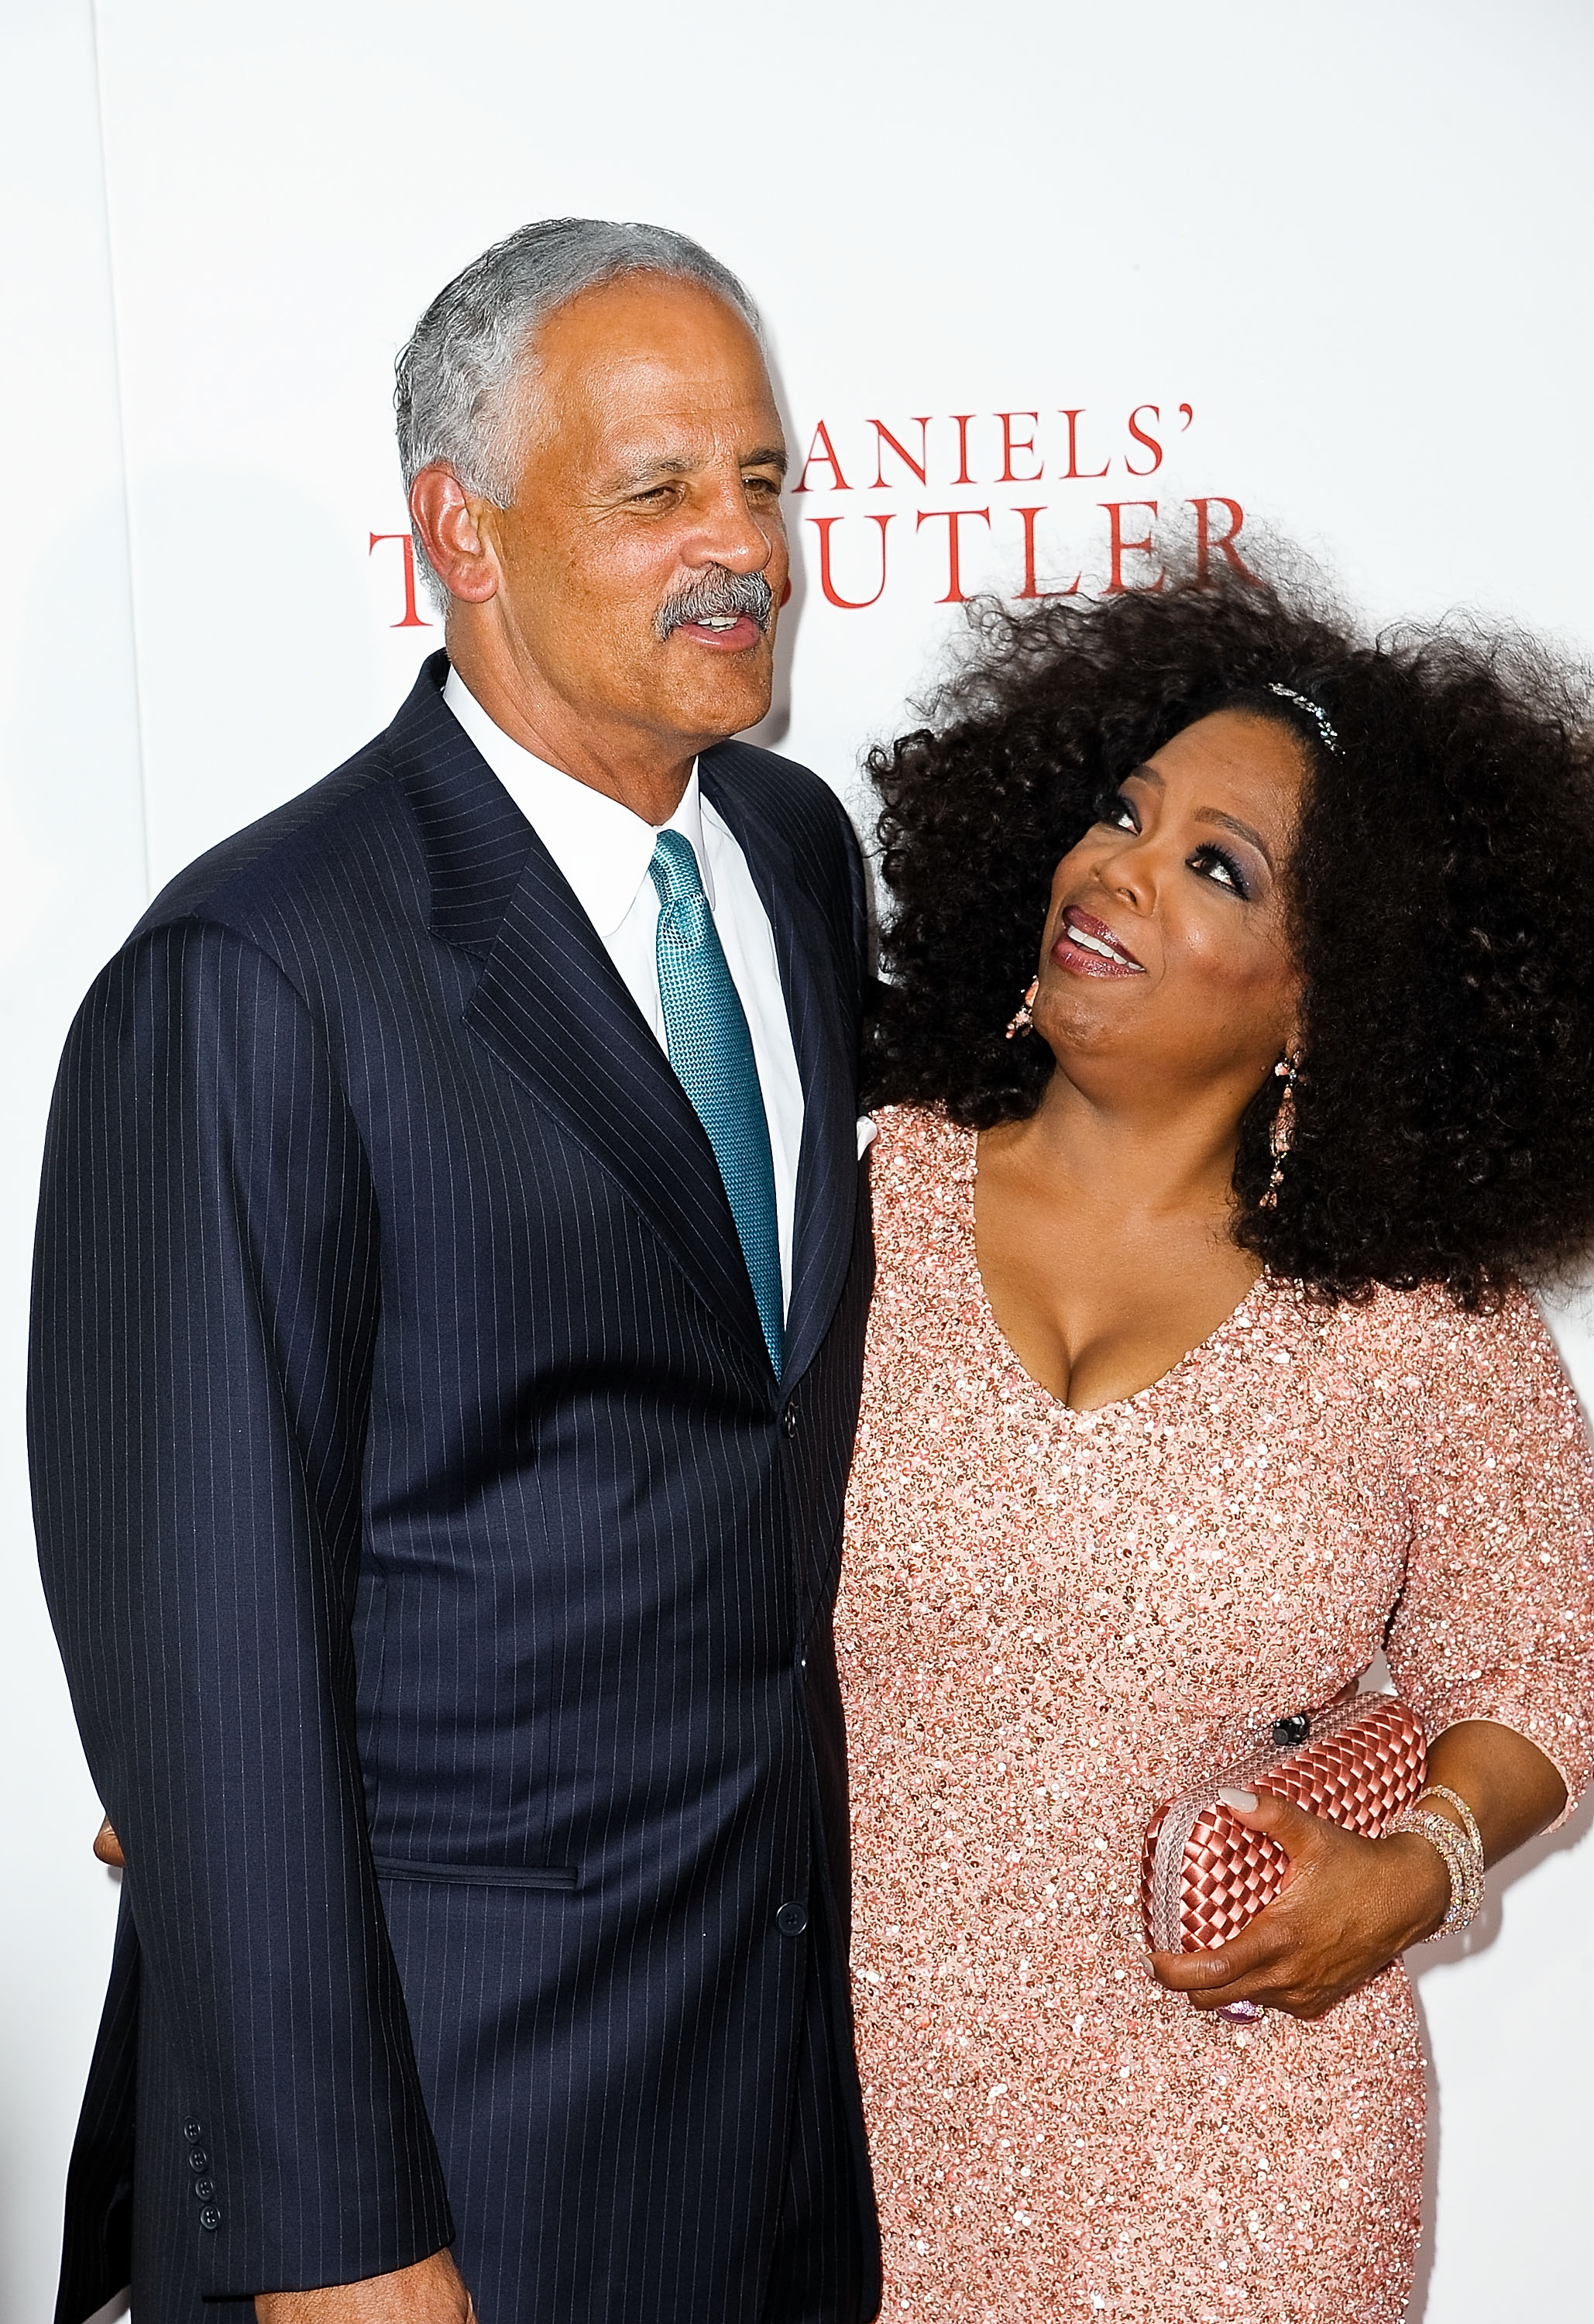 Stedman Graham and Oprah Winfrey attend "The Butler" New York Premiere at Ziegfeld Theater in New York City on August 5, 2013. | Source: Getty Images